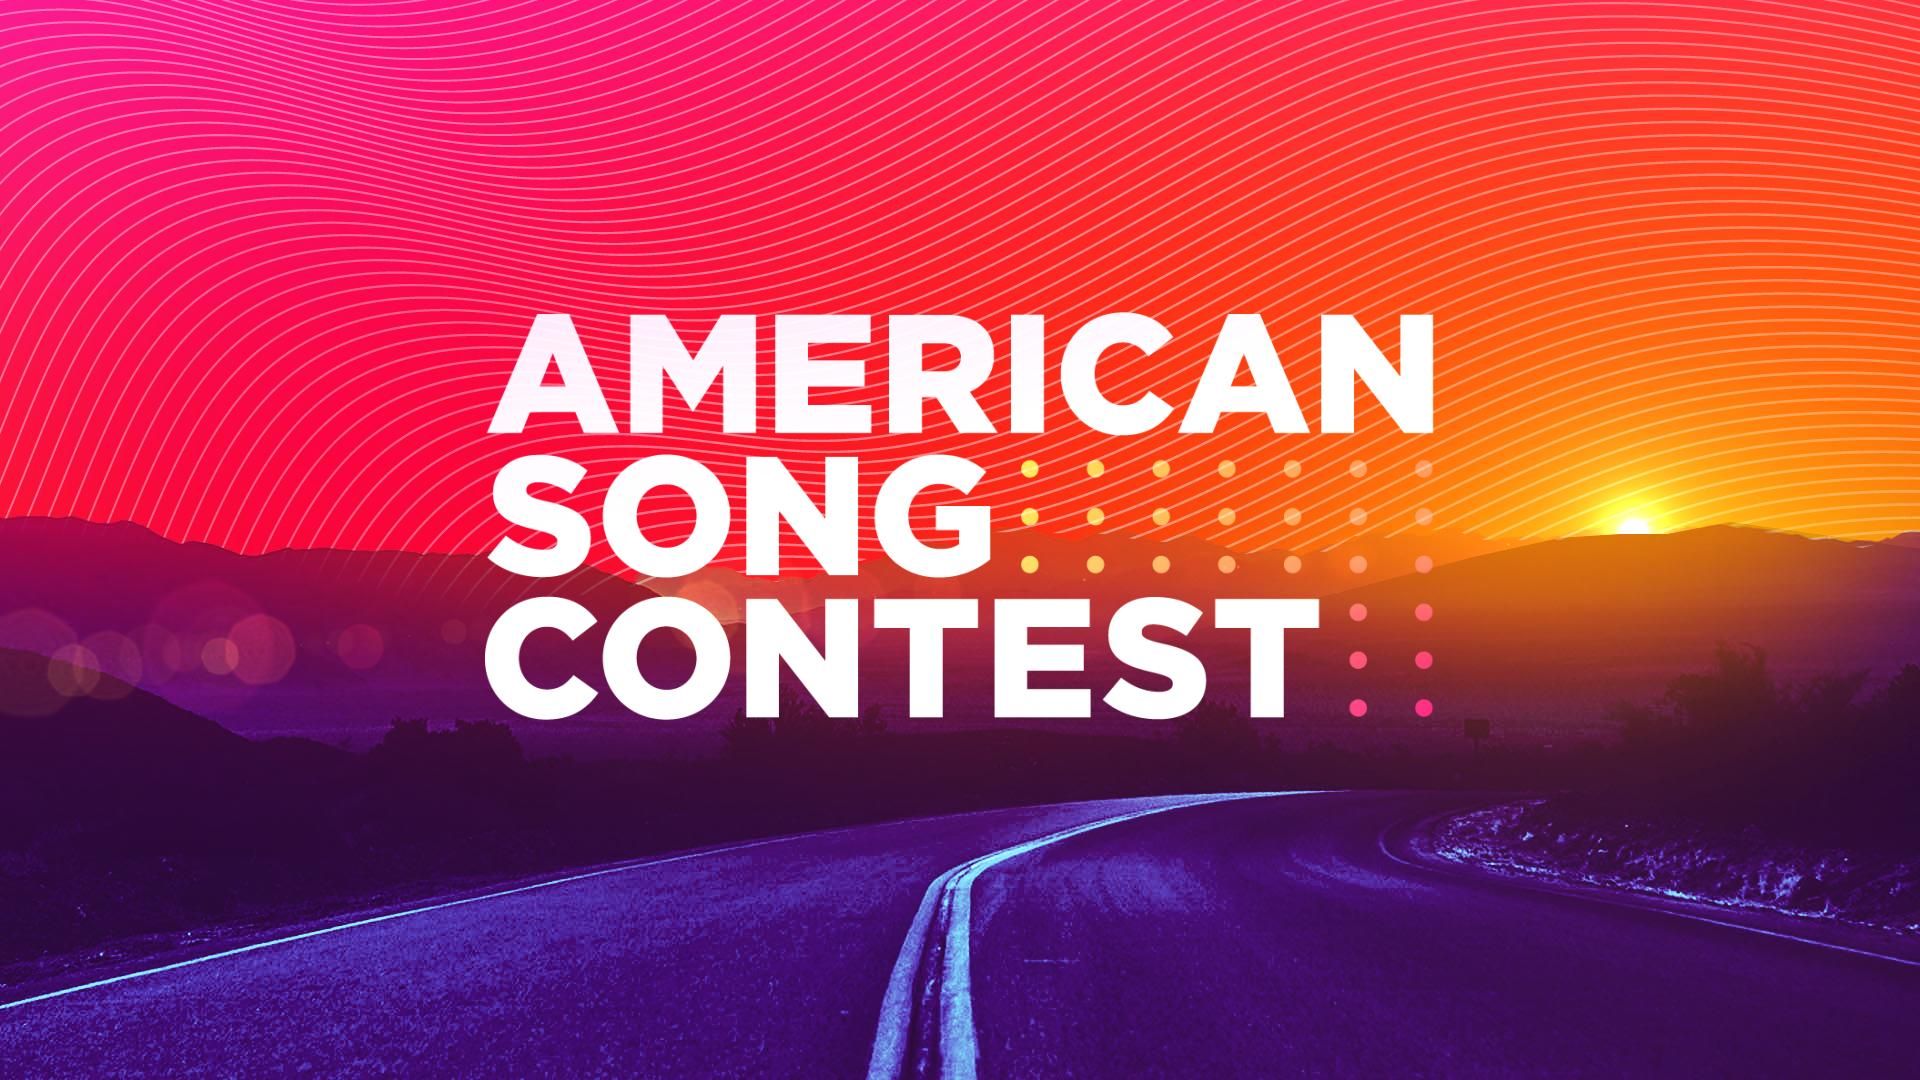 American Song Contest background